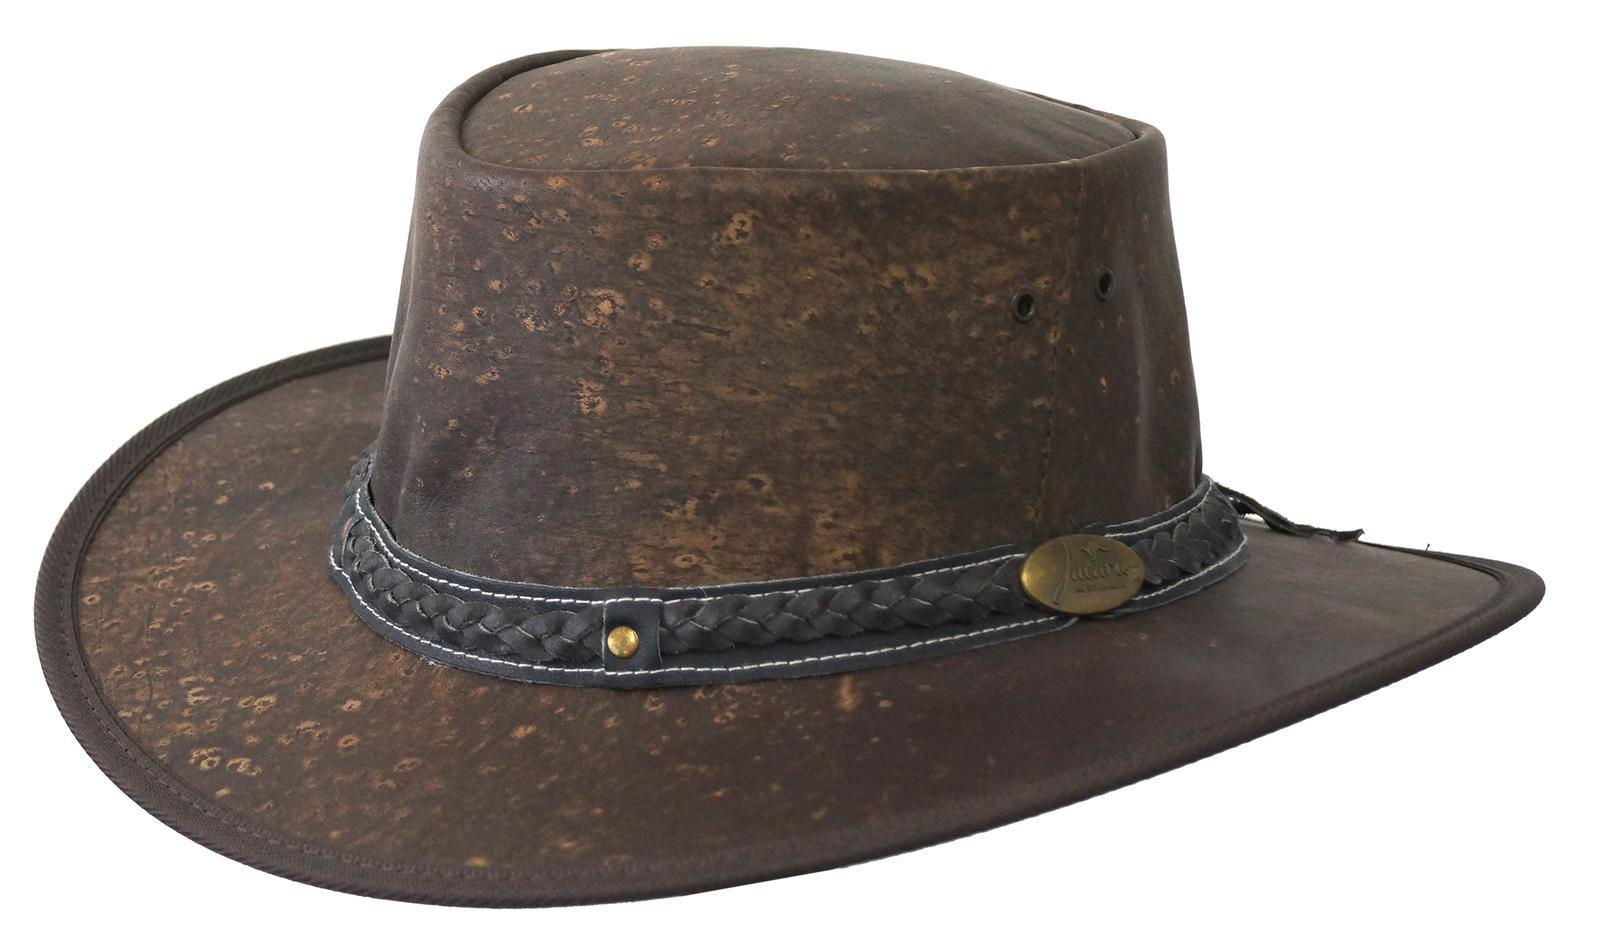 JACARU Squashy Kangaroo Leather Hat Roo Traveller Crushable Travel Outback - Brown - XXL